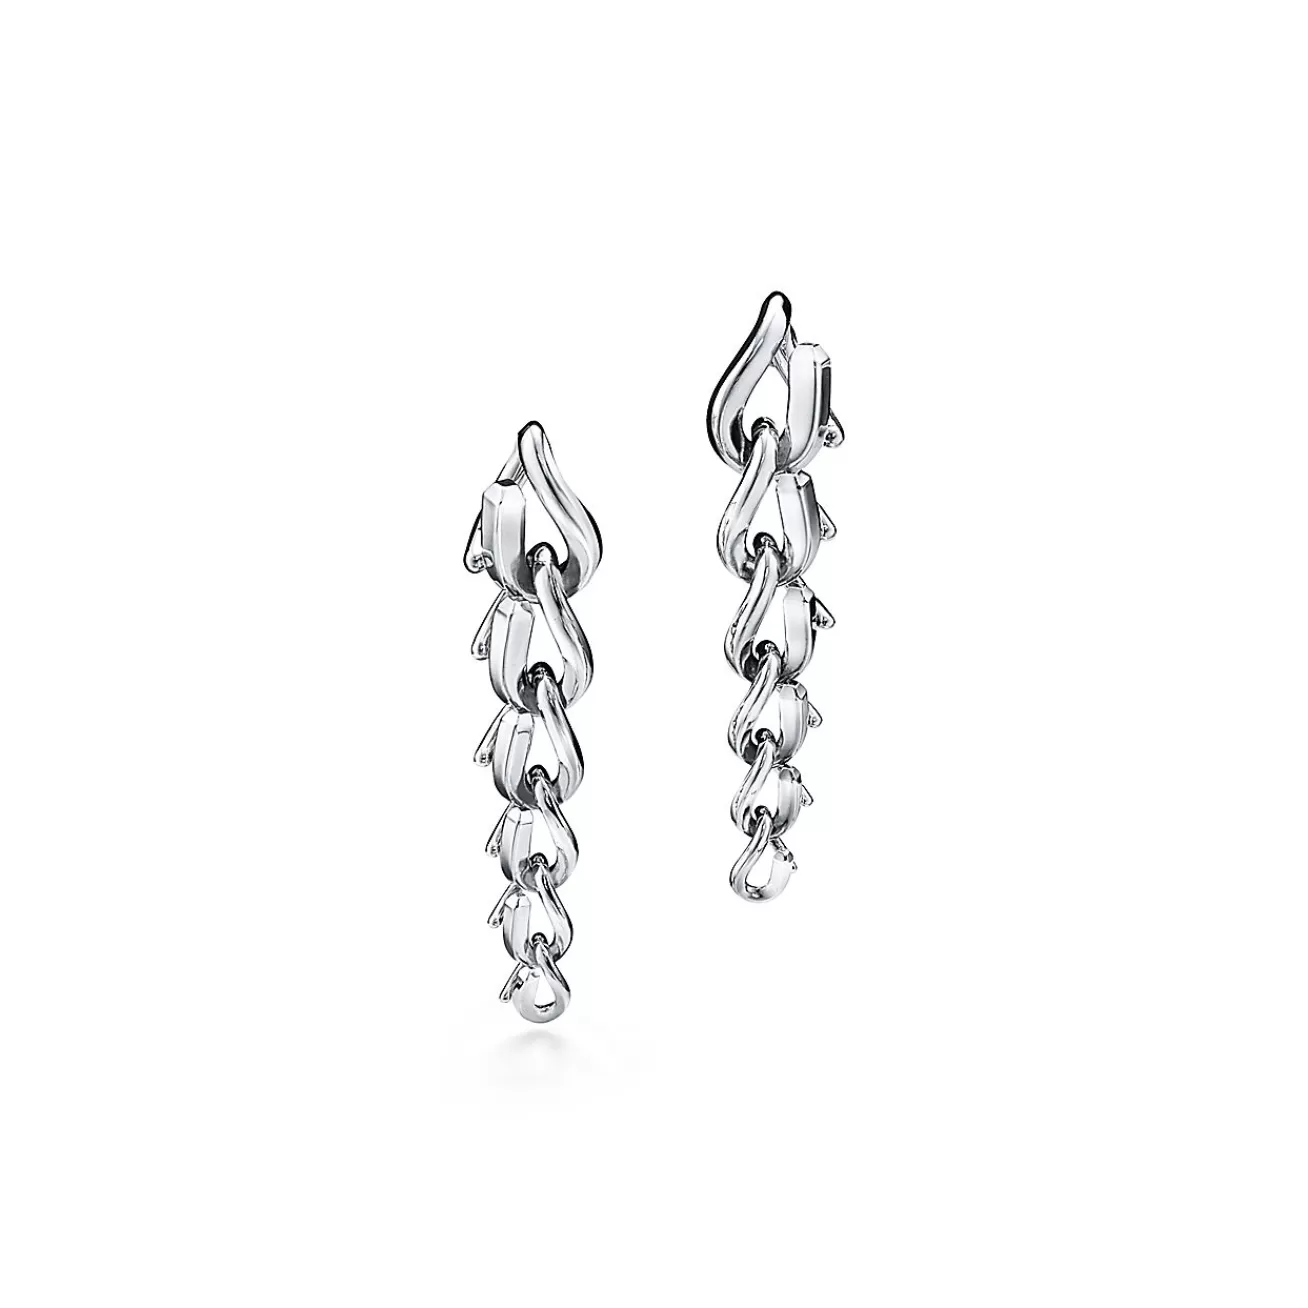 Tiffany & Co. Tiffany Forge Drop Link Earrings in High-polished Sterling Silver | ^ Earrings | New Jewelry